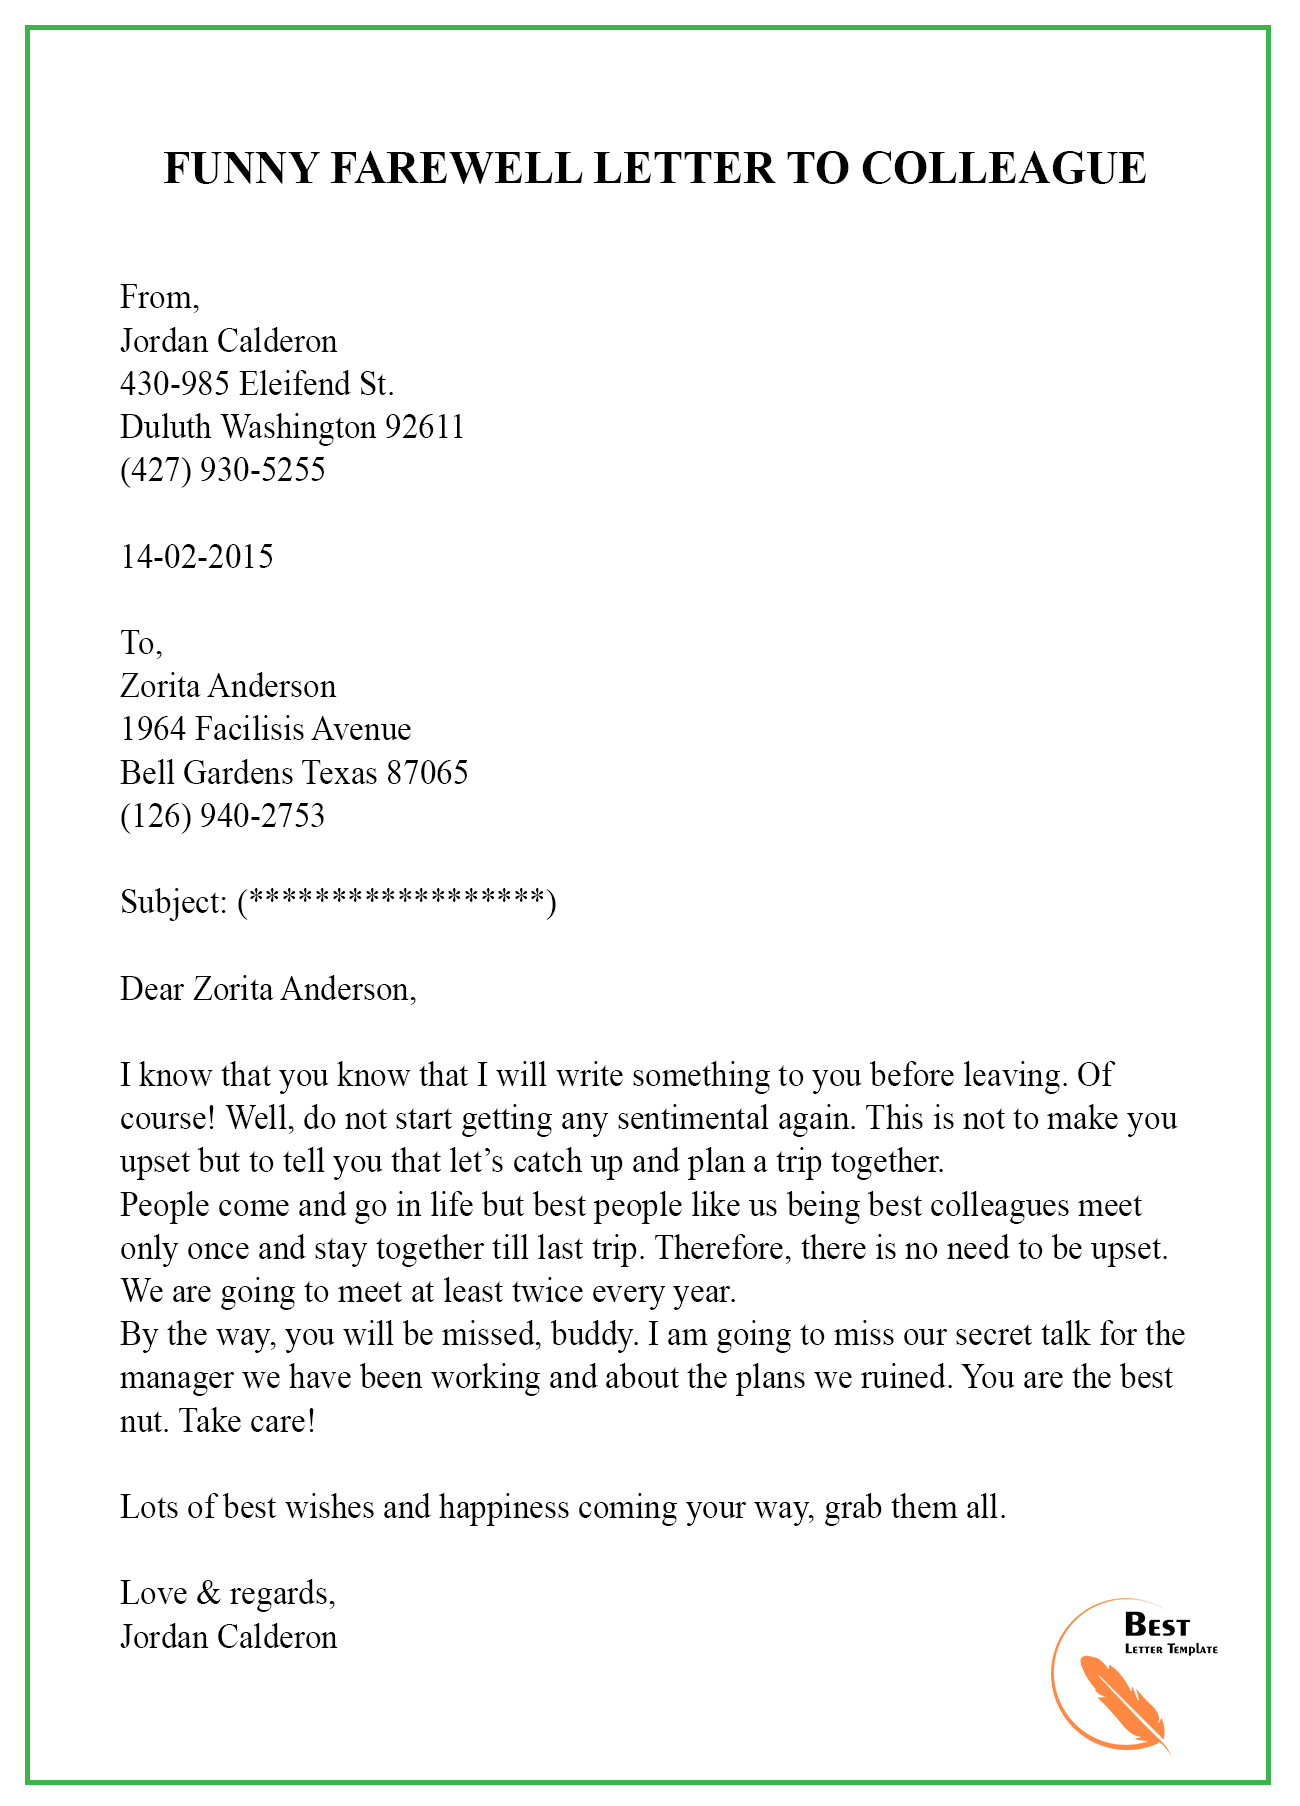 farewell-letter-to-colleagues-coworker-format-sample-example